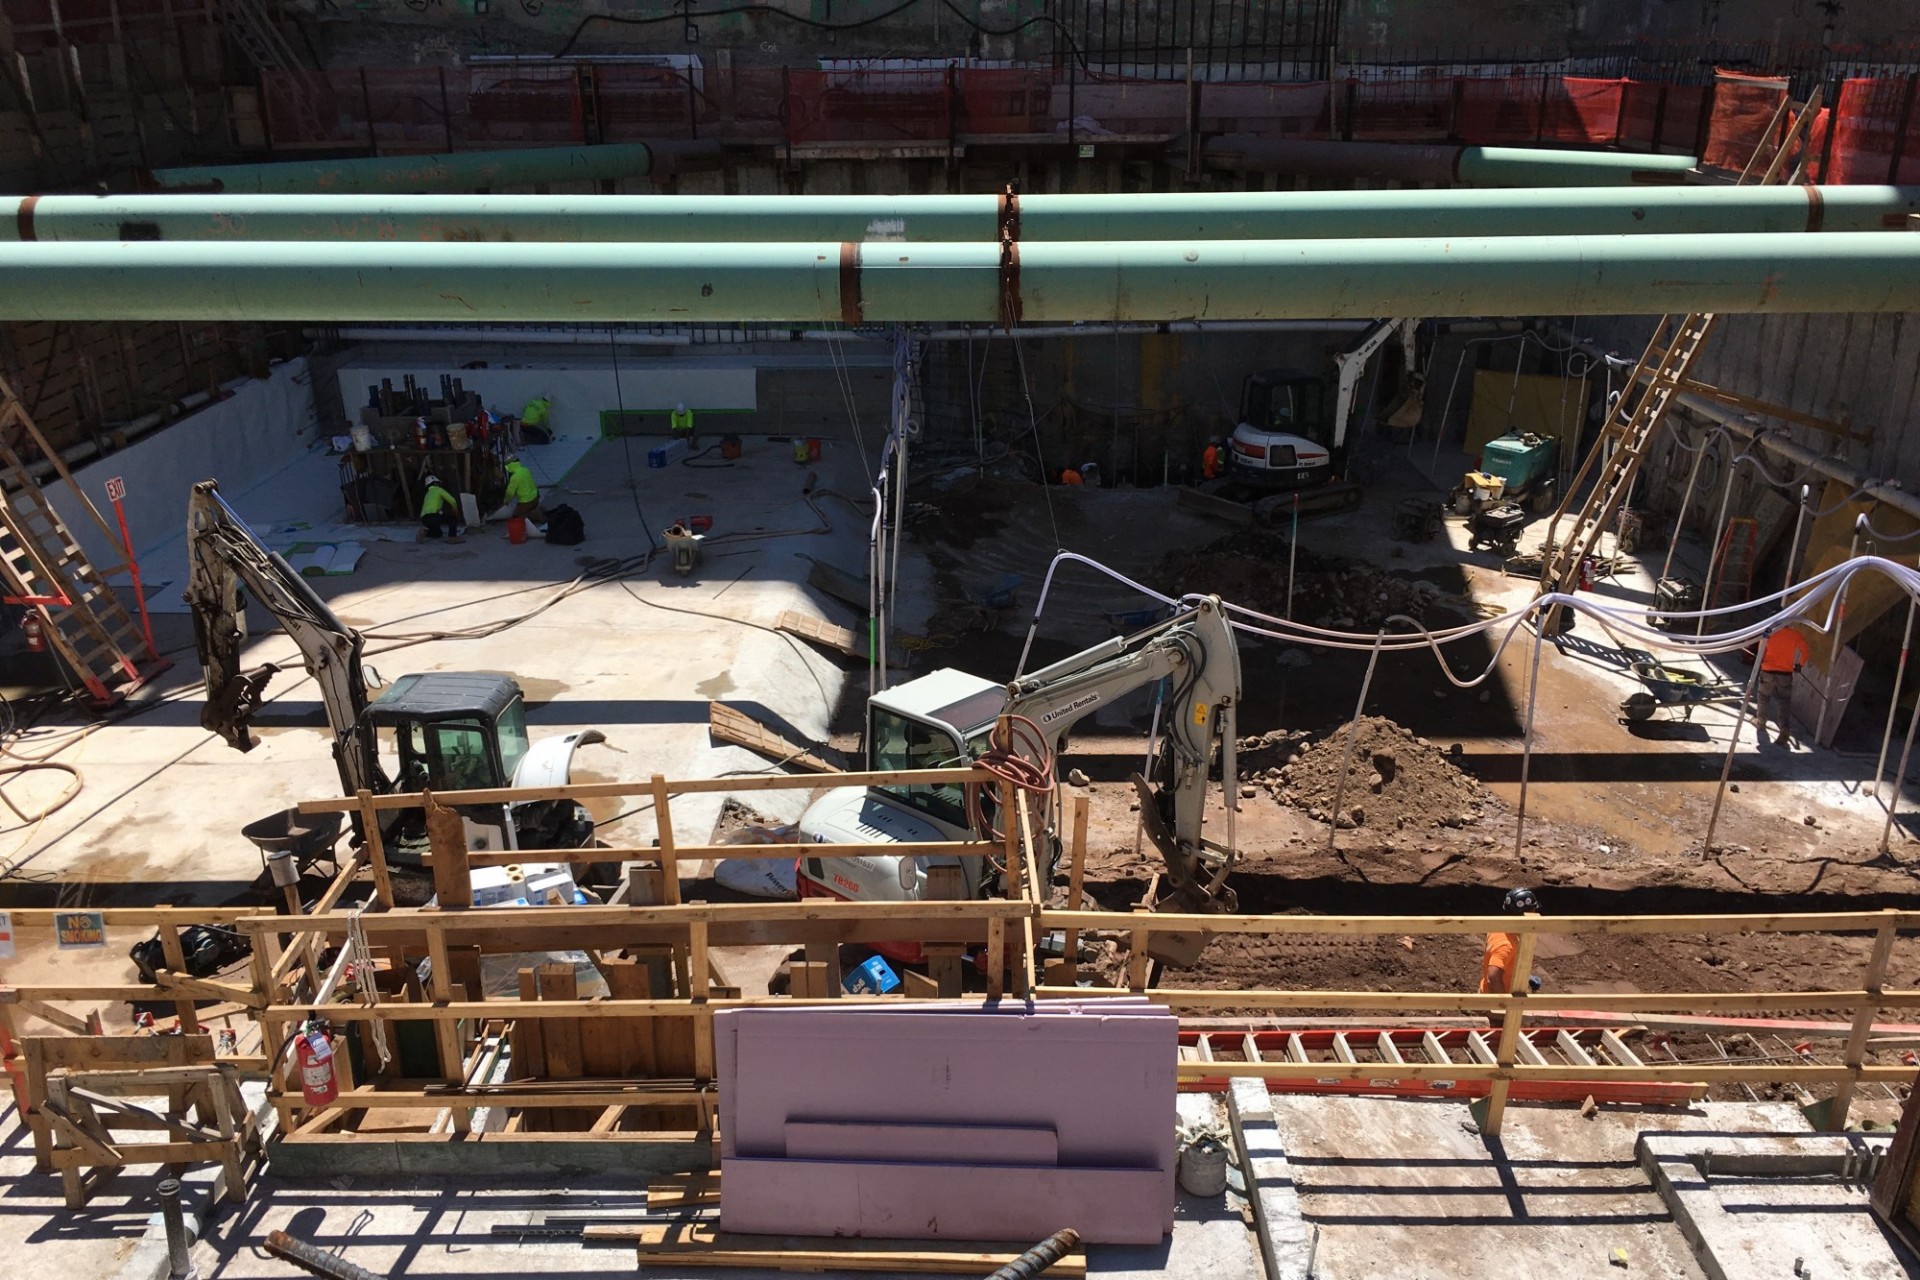 A view of the construction site from the ground level with large green pipes running overhead.